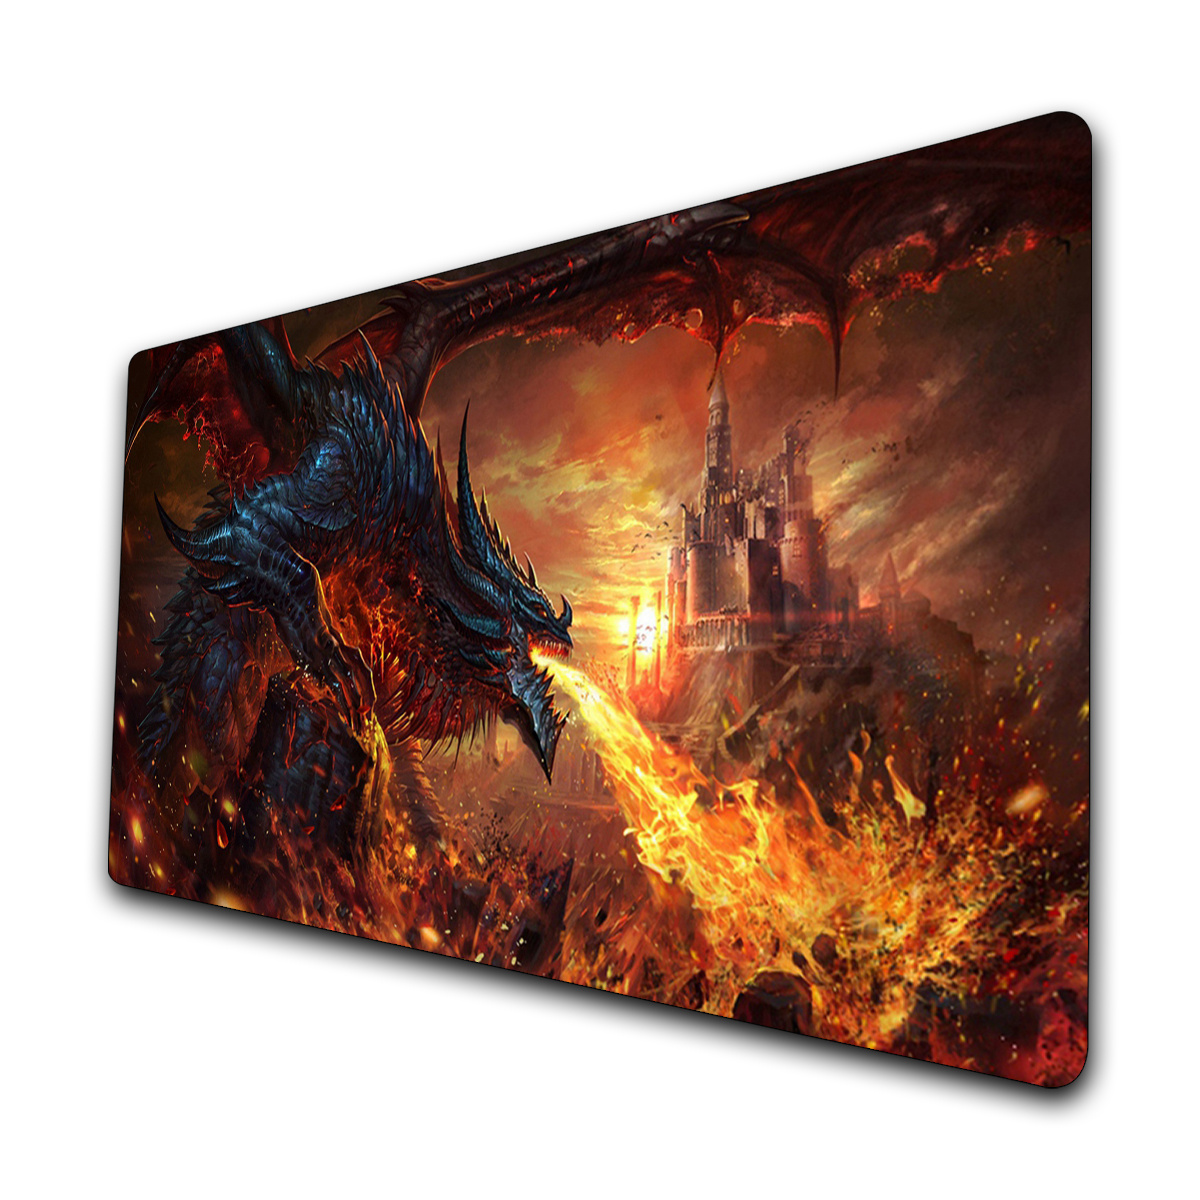 

1pc Magic Fire Dragon Mouse Pad Deskt Mat Large Computer Keyboard Pad Anime Game Mouse Pad Board And Card Game Pad Tcg Playmat Table Mats Compatible For Mtg Rpg Ccg Trading Card Game Play Mats